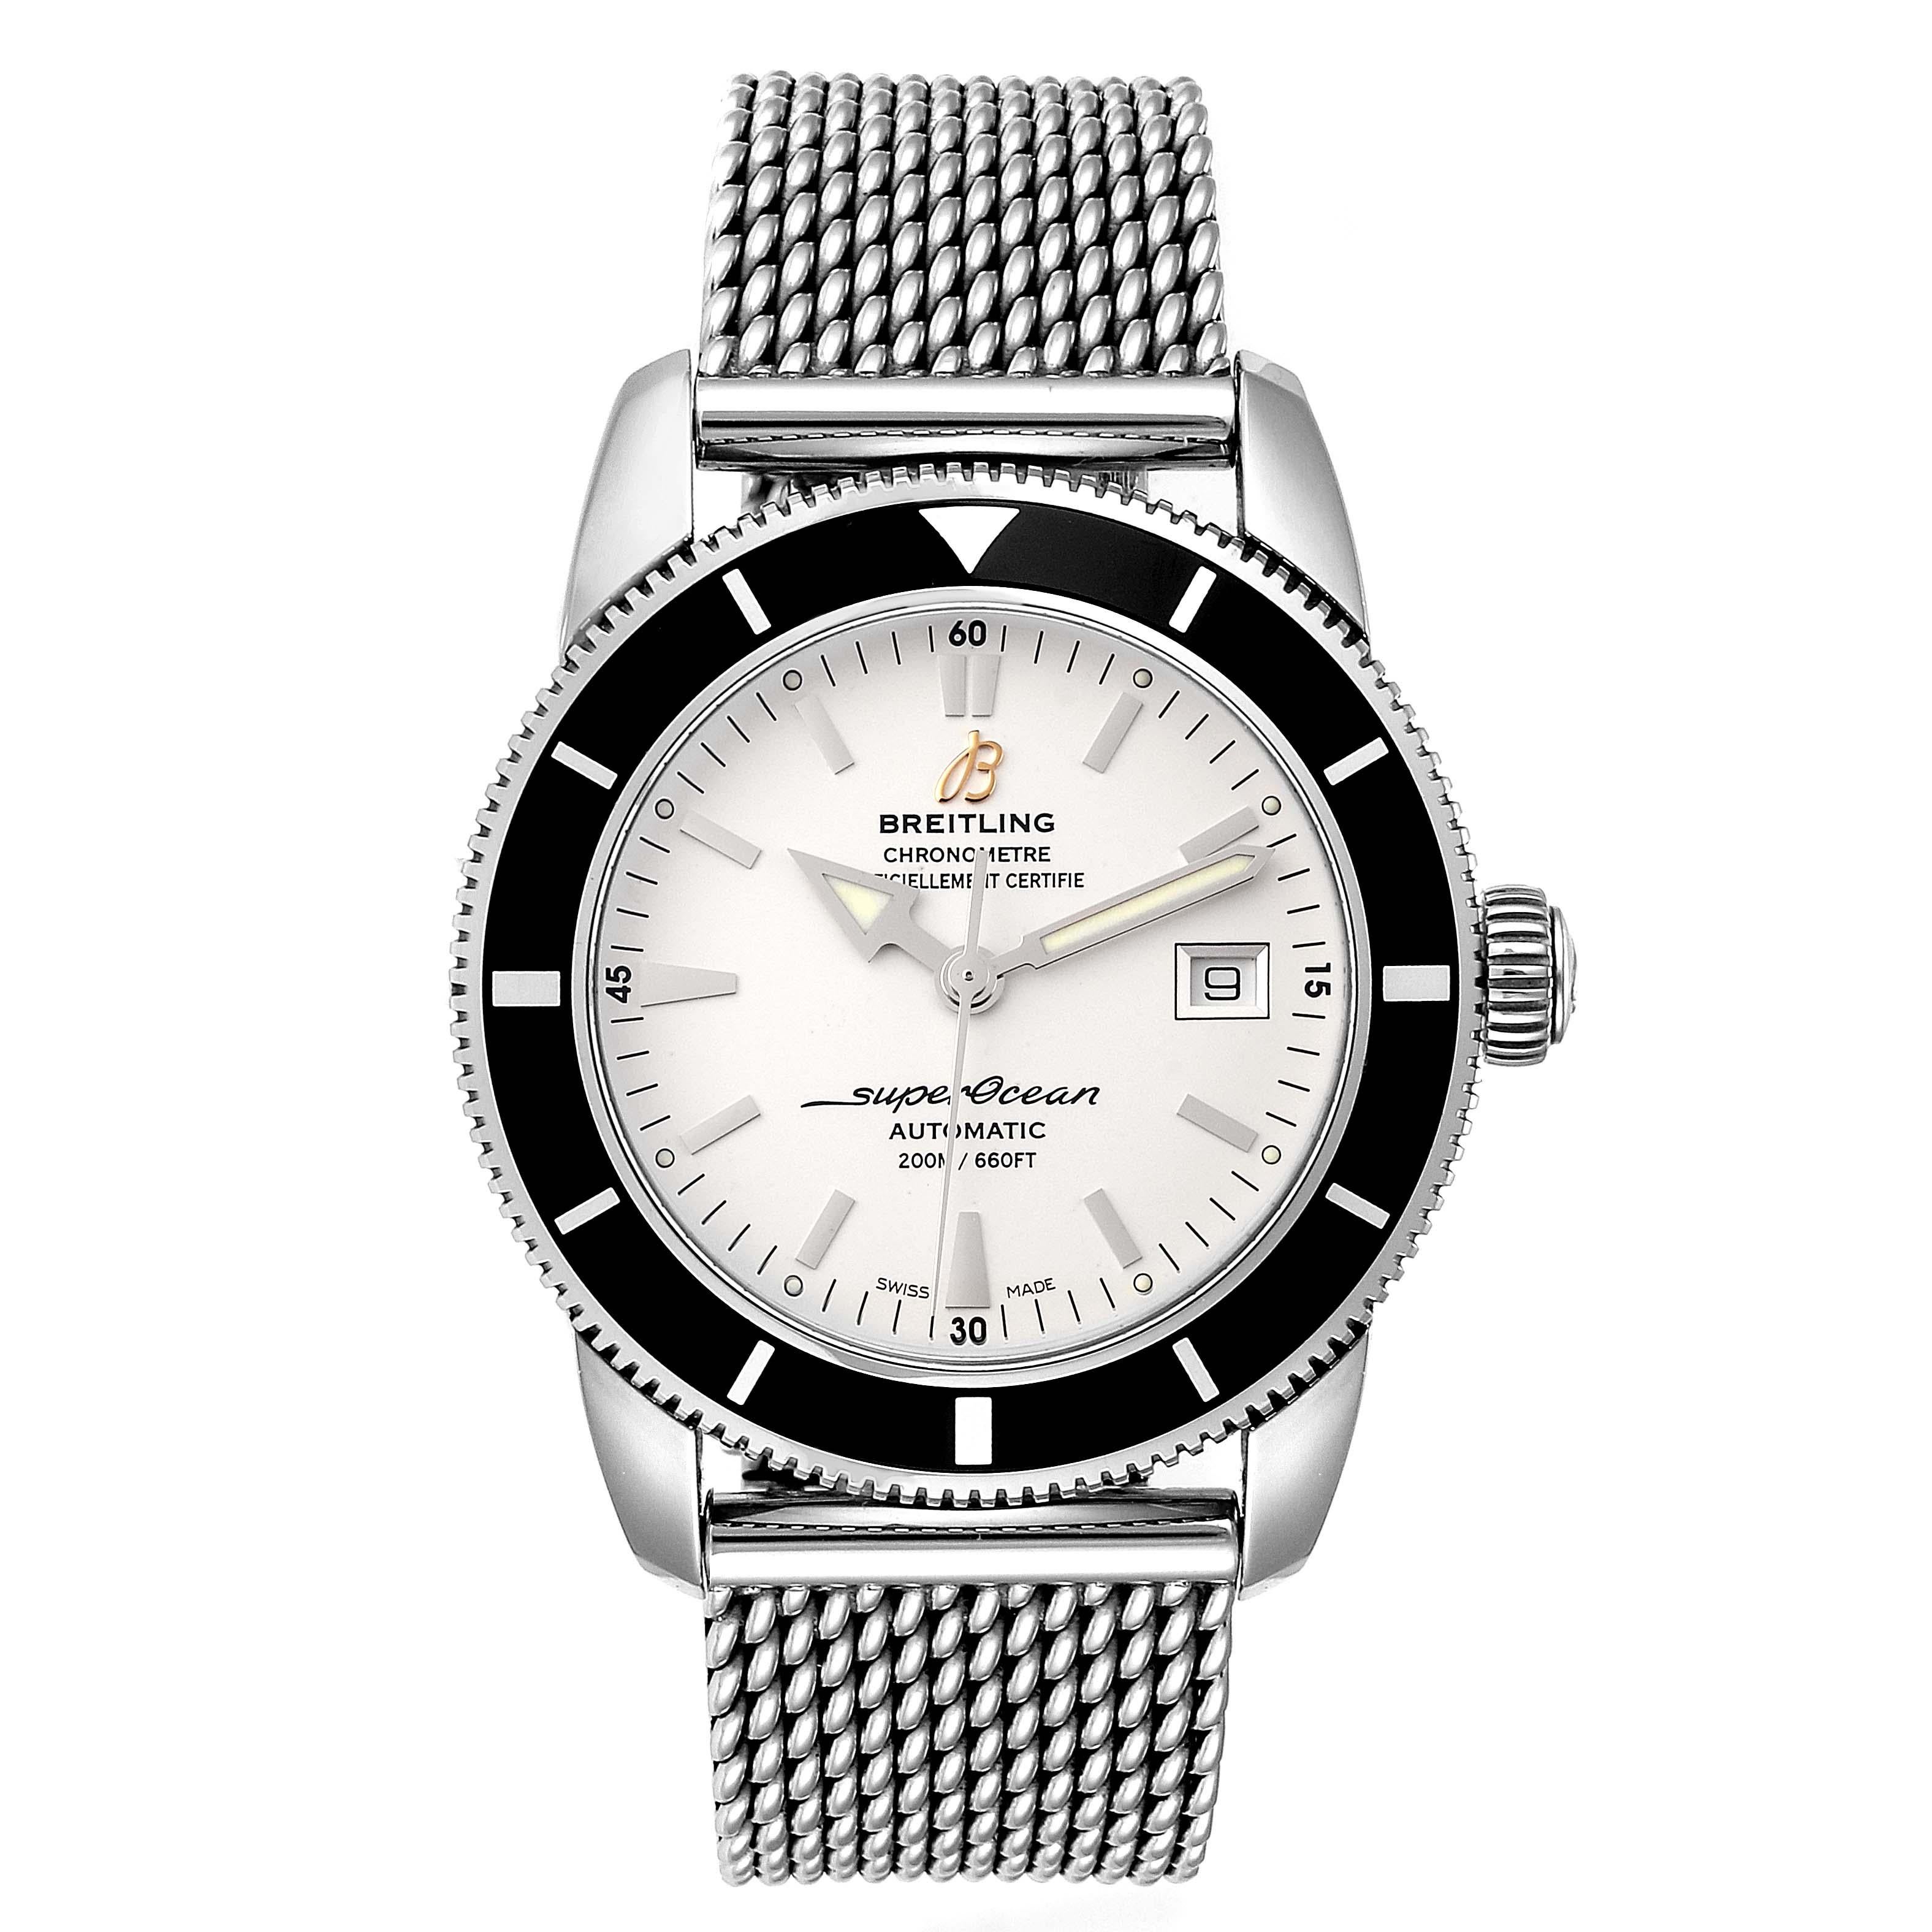 Breitling Superocean Heritage 42 Steel Mens Watch A17321 Box Papers. Automatic self-winding movement. Stainless steel case 42 mm in diameter. Stainless steel screwed-down crown. Black unidirectional revolving bezel. Scratch resistant sapphire